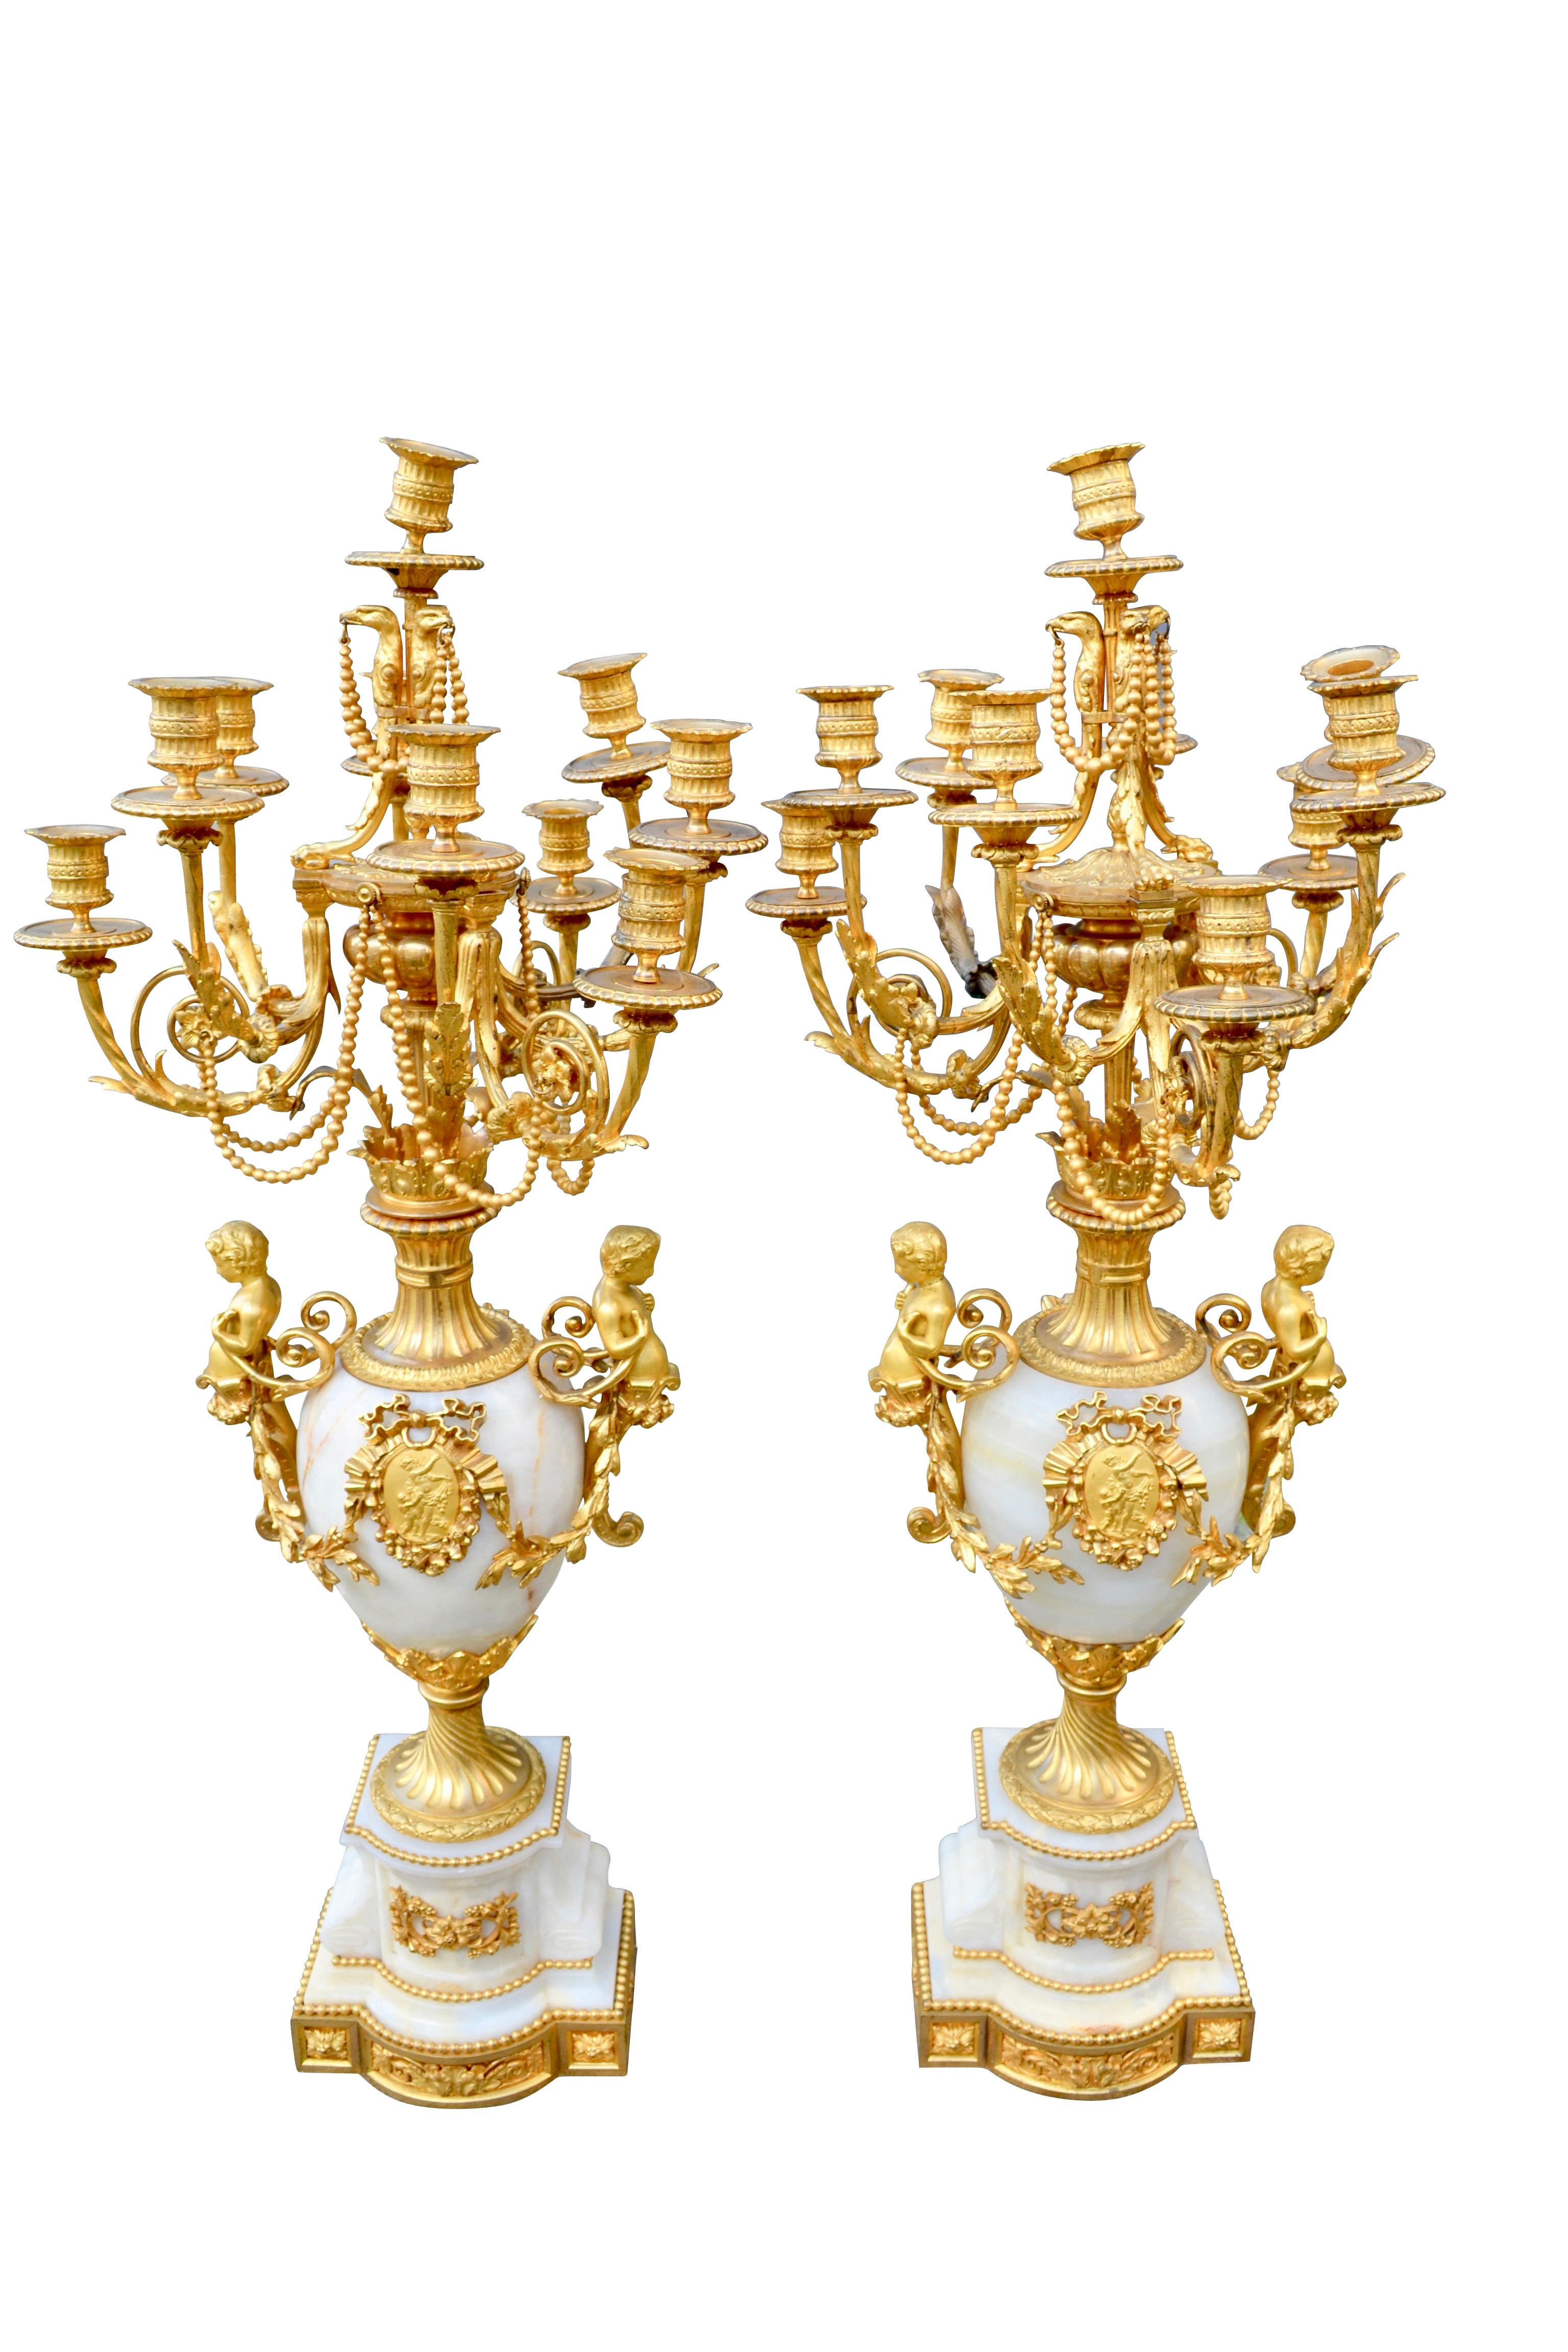 This grand pair of candelabra are of the highest quality, made of carved onyx, and finely cast gilded bronze. They were made during the Napoleon III era in France and are exceptional examples of the decorative arts of the period. They are Louis XVI